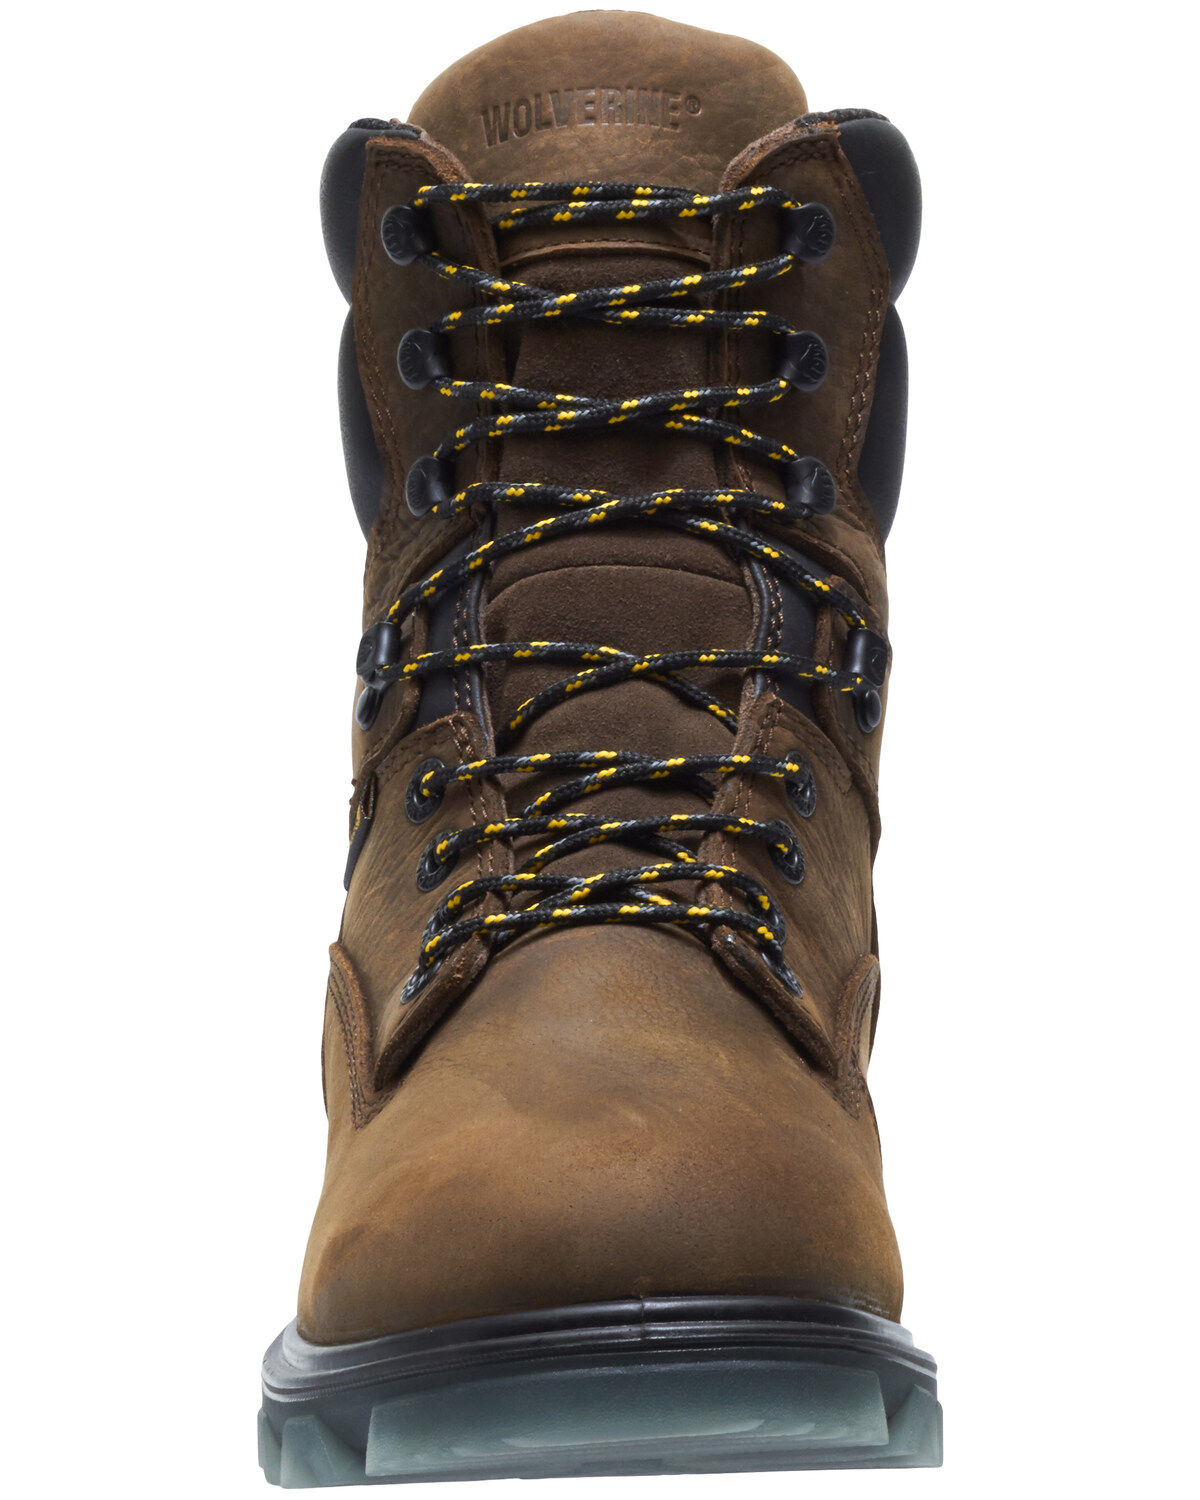 insulated men's work boots